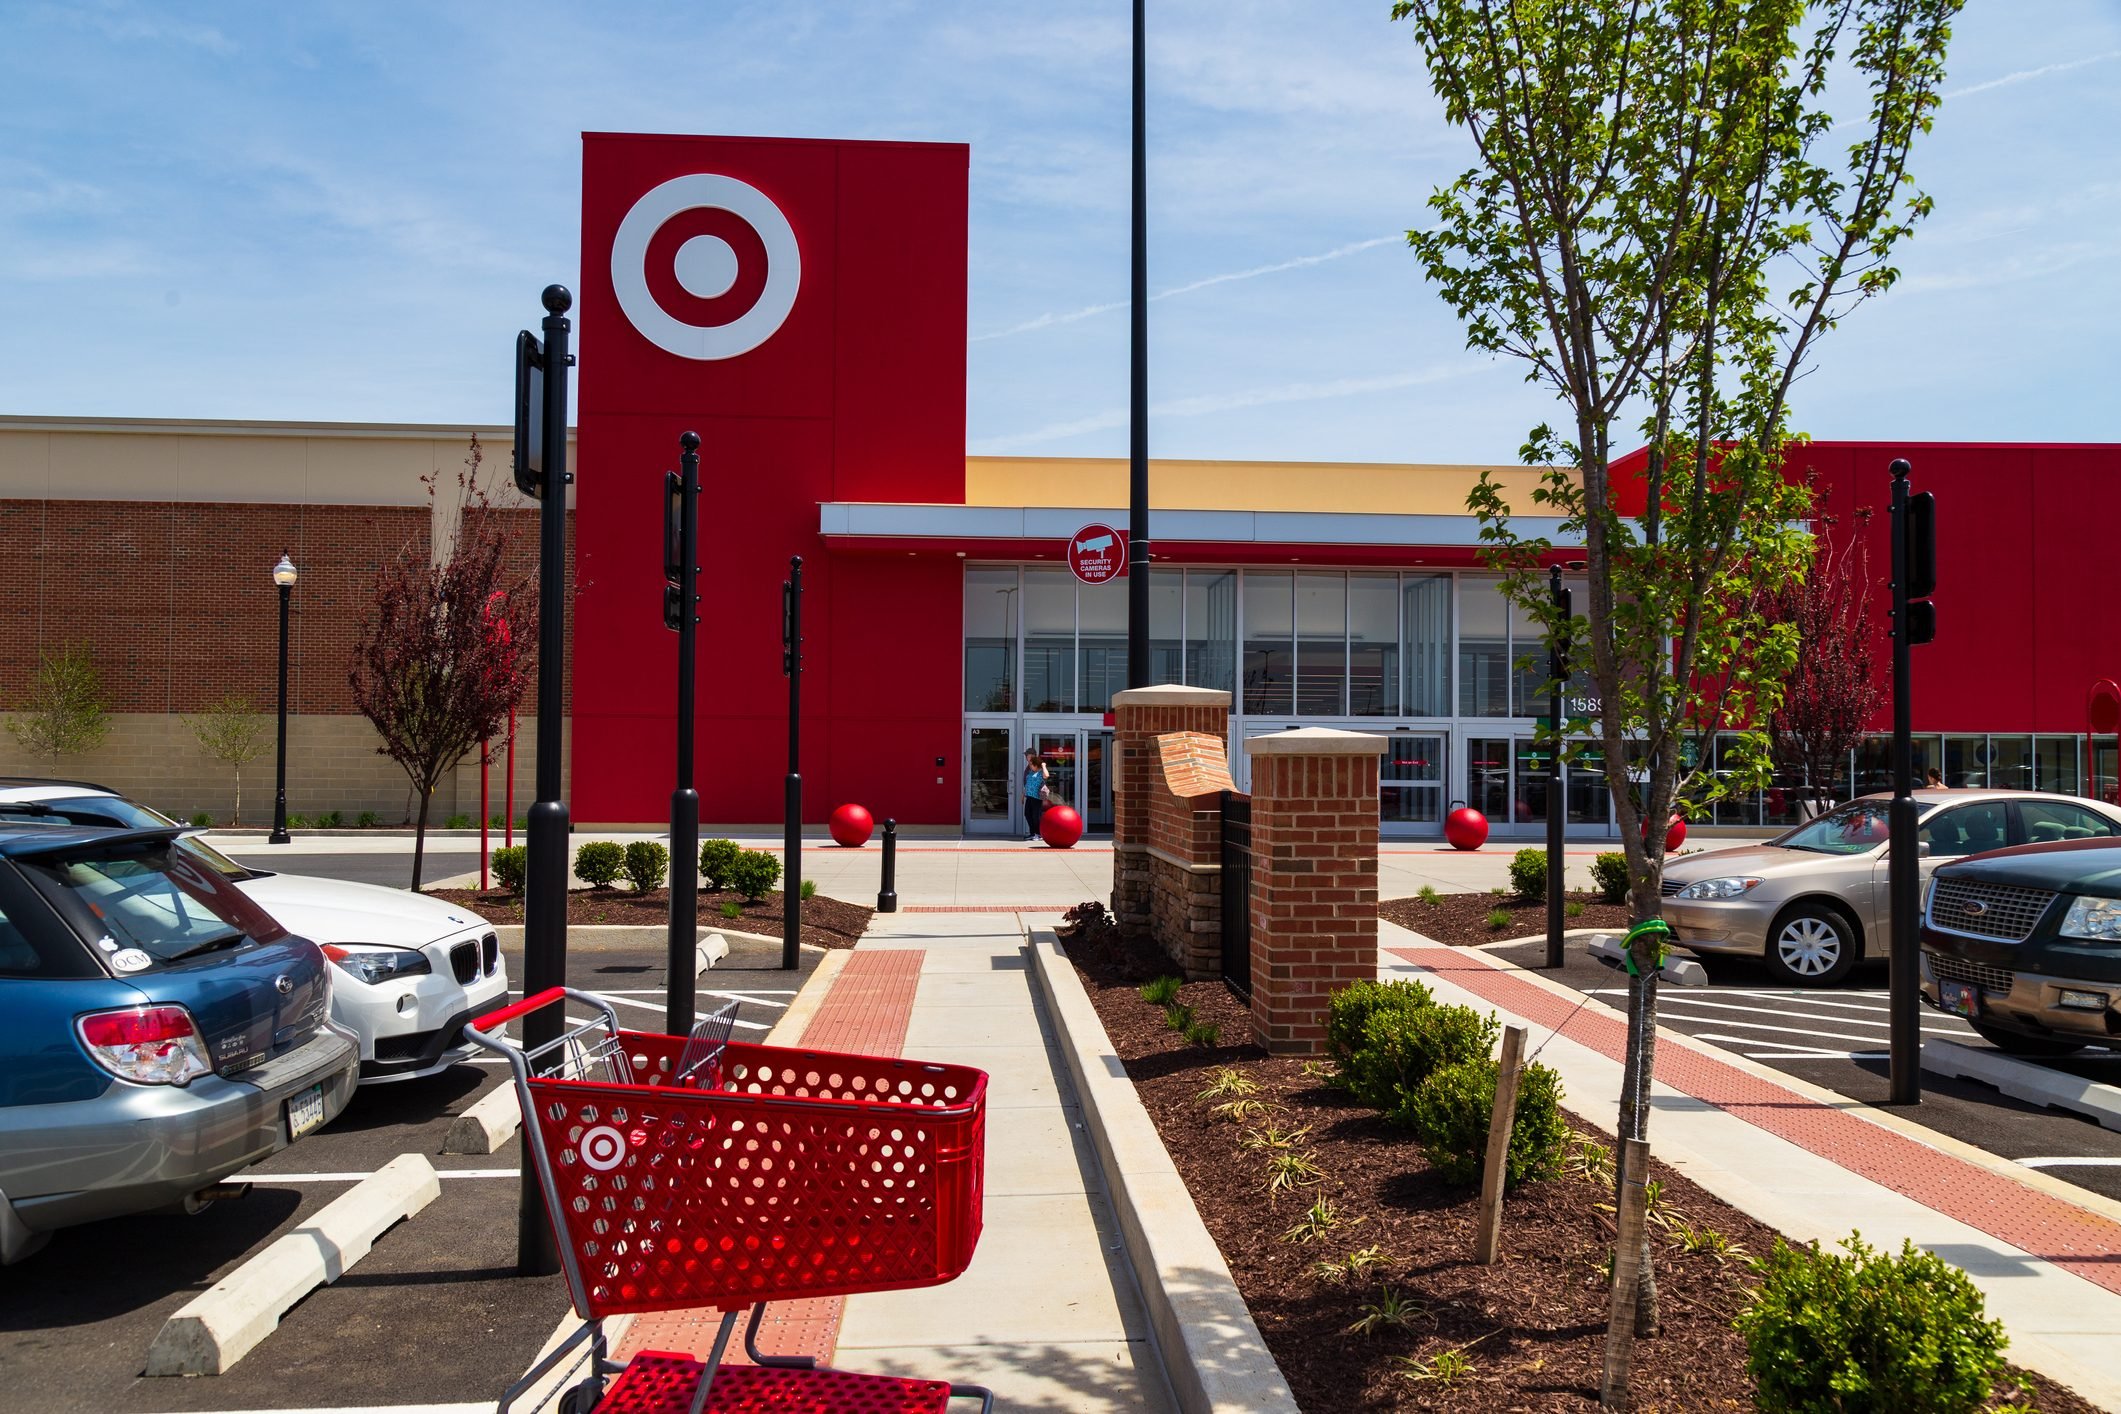 I'm a shopping pro - five Target must-haves under $5 that you can only find  in one store section